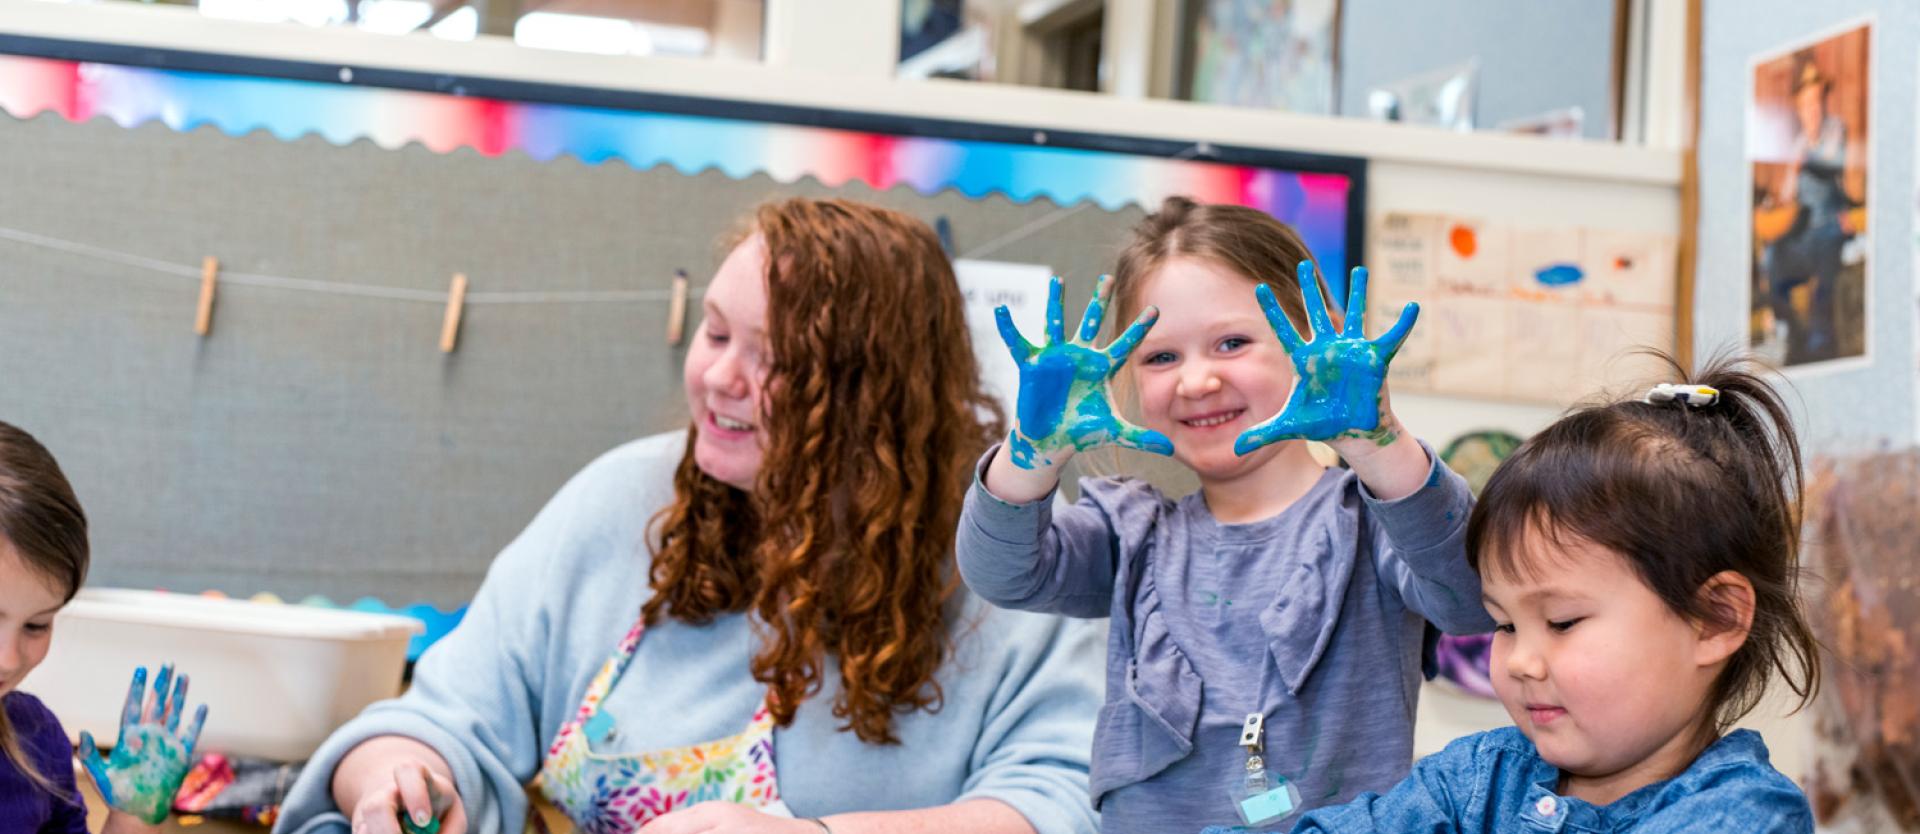 Child holding up her hands with blue paint on them sitting next to a teacher and another child